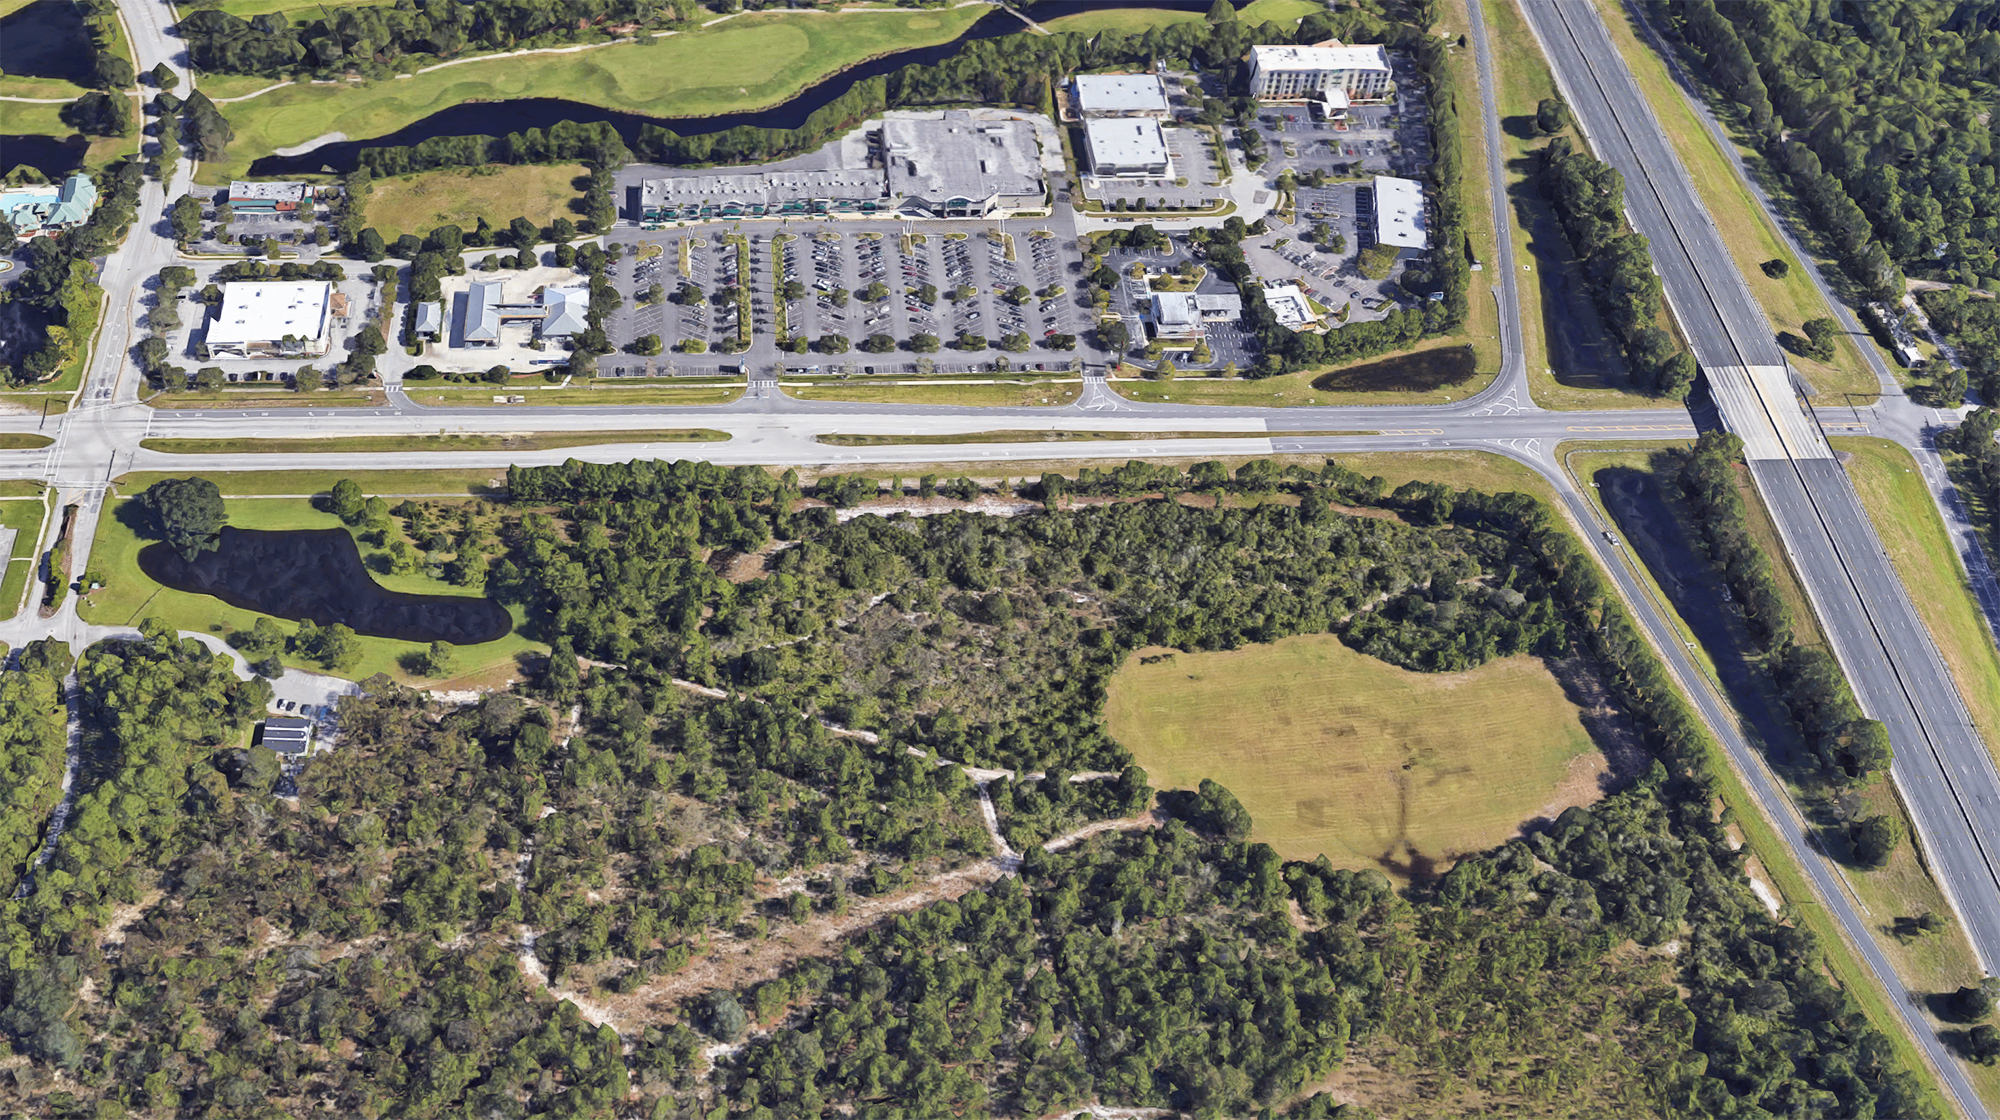 The proposed development area is across the street from  the Windsor Commons shopping center. (Google)